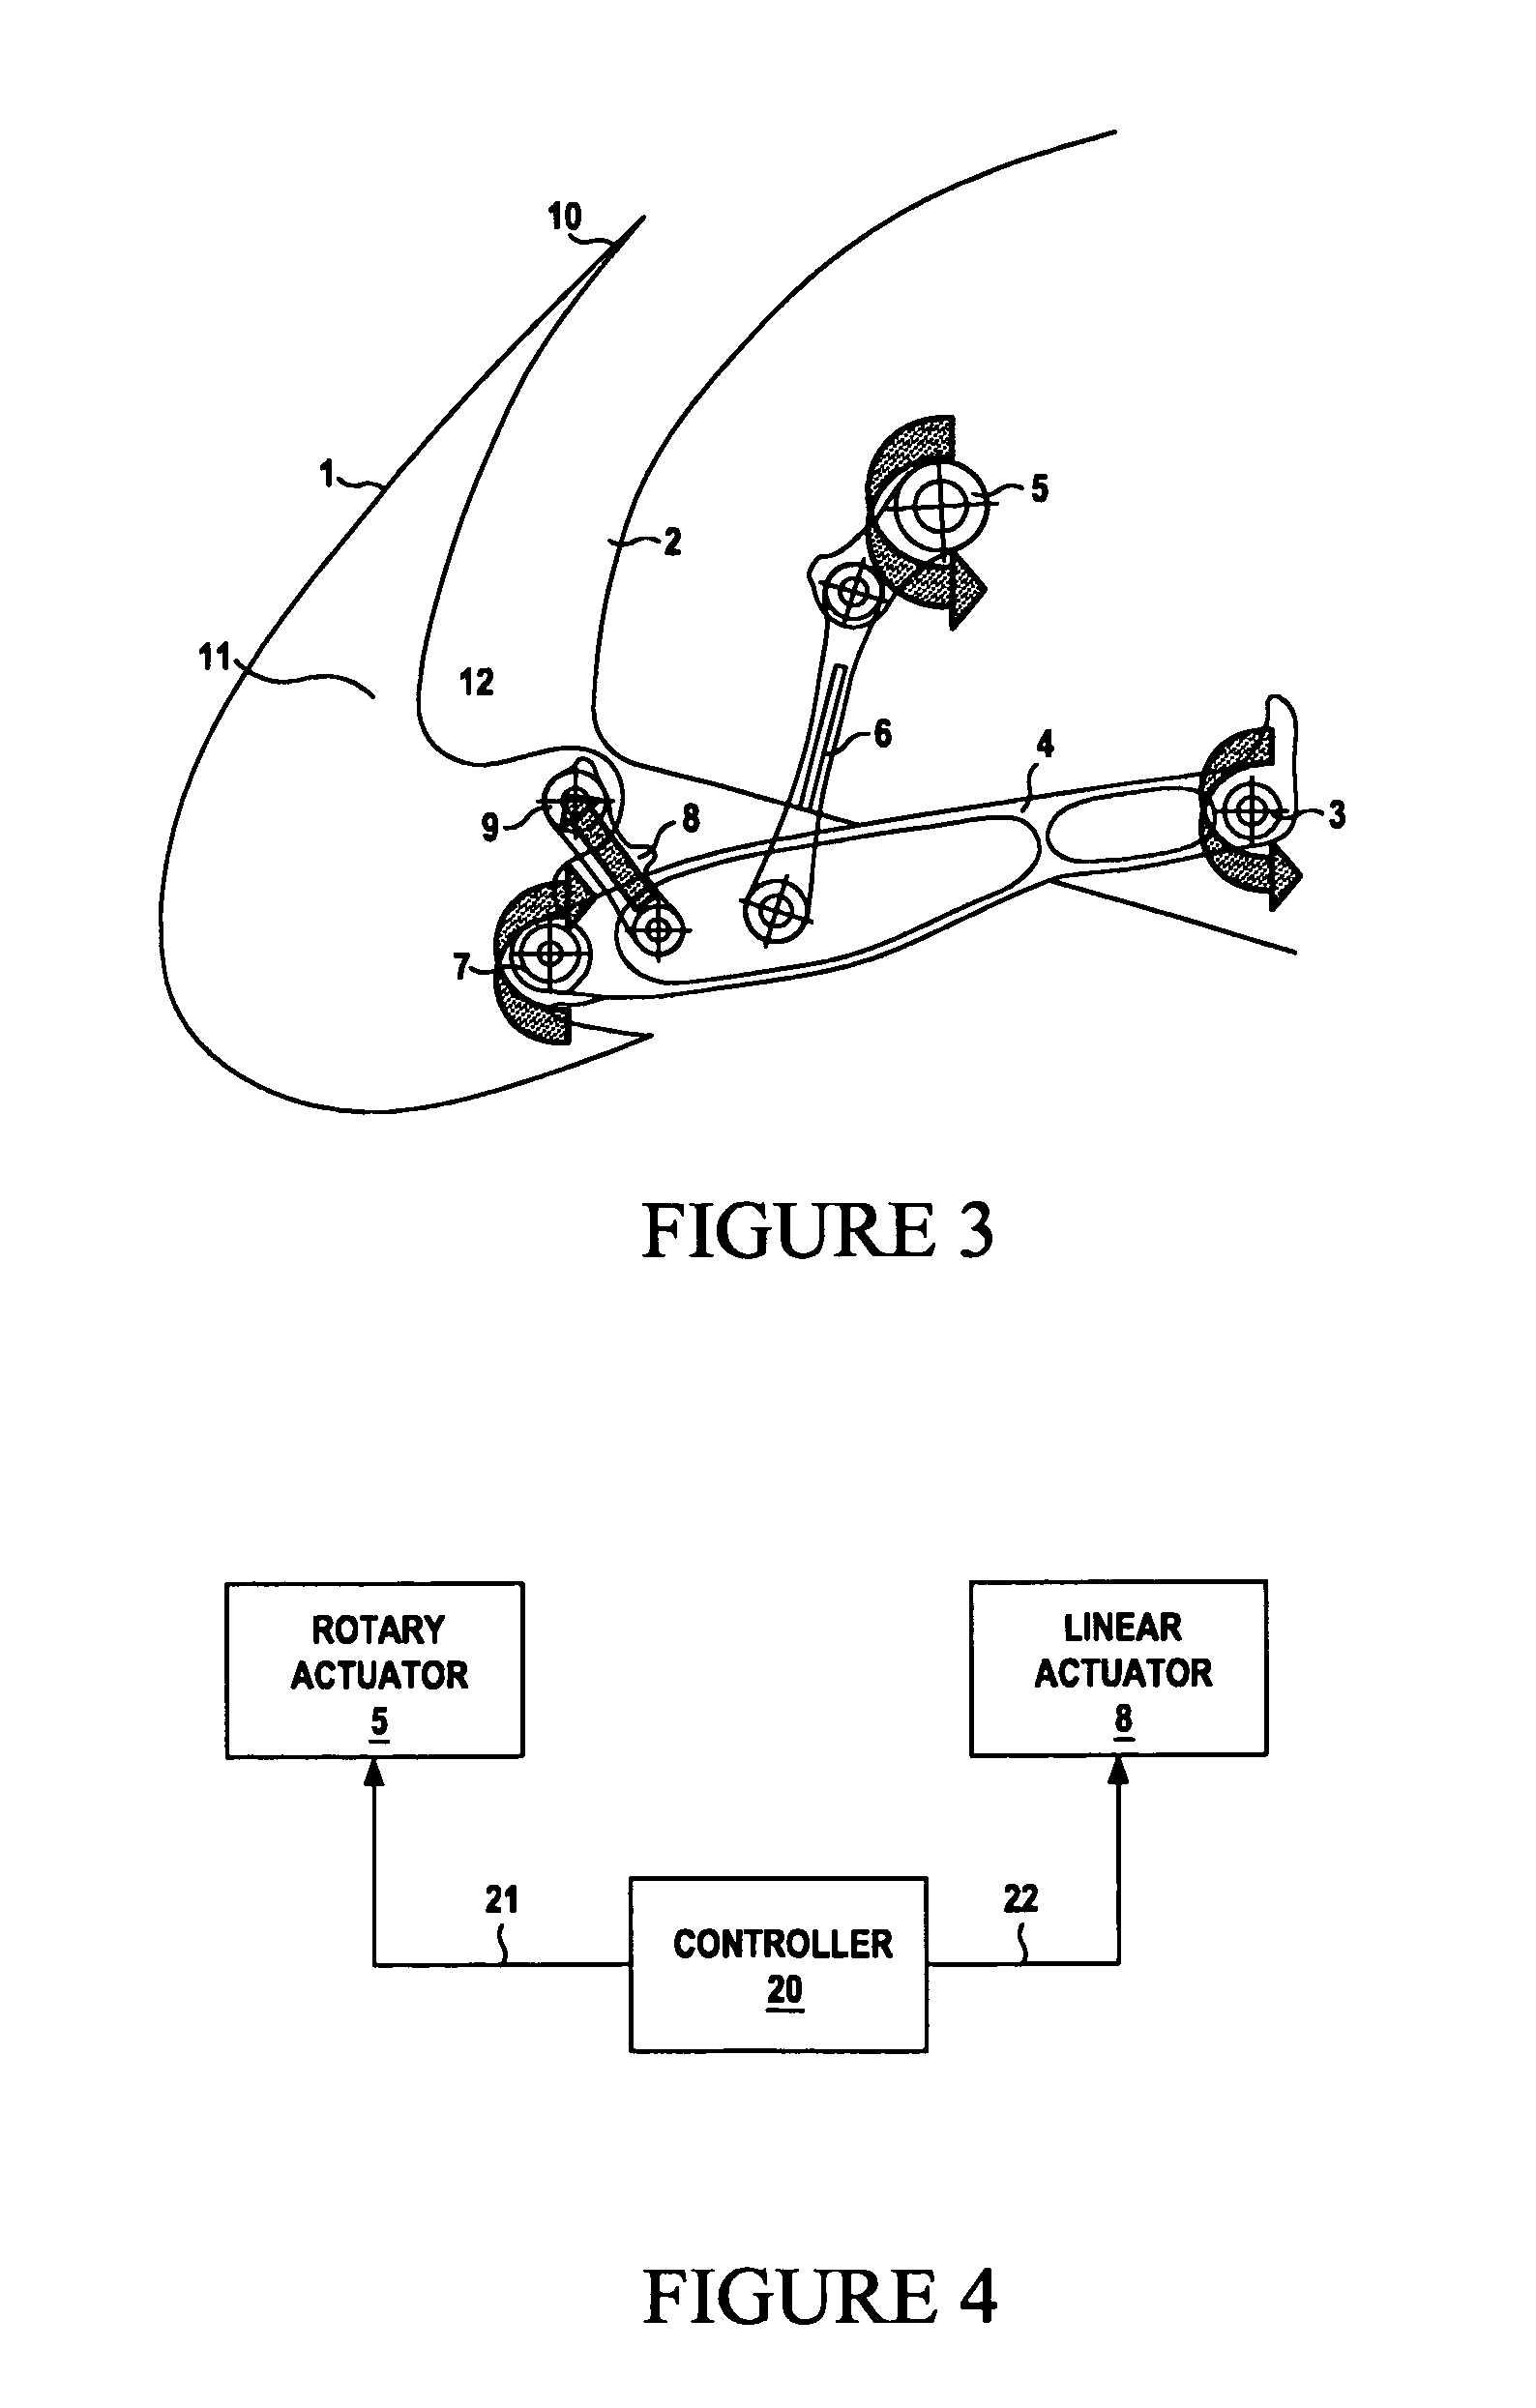 Actuation system for leading edge high-lift device